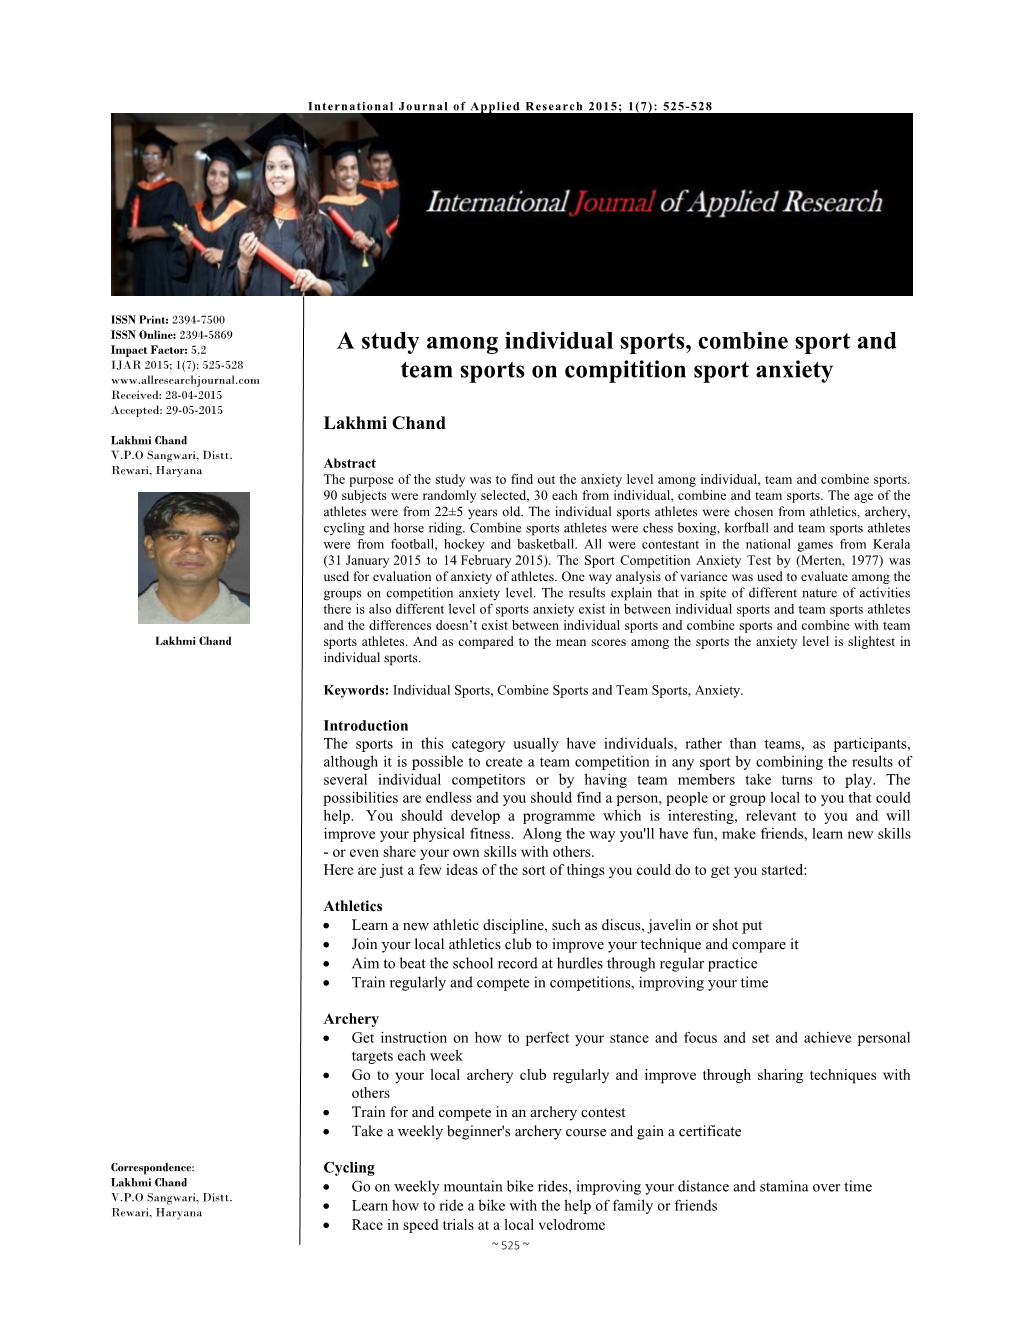 A Study Among Individual Sports, Combine Sport and Team Sports on Compitition Sport Anxiety